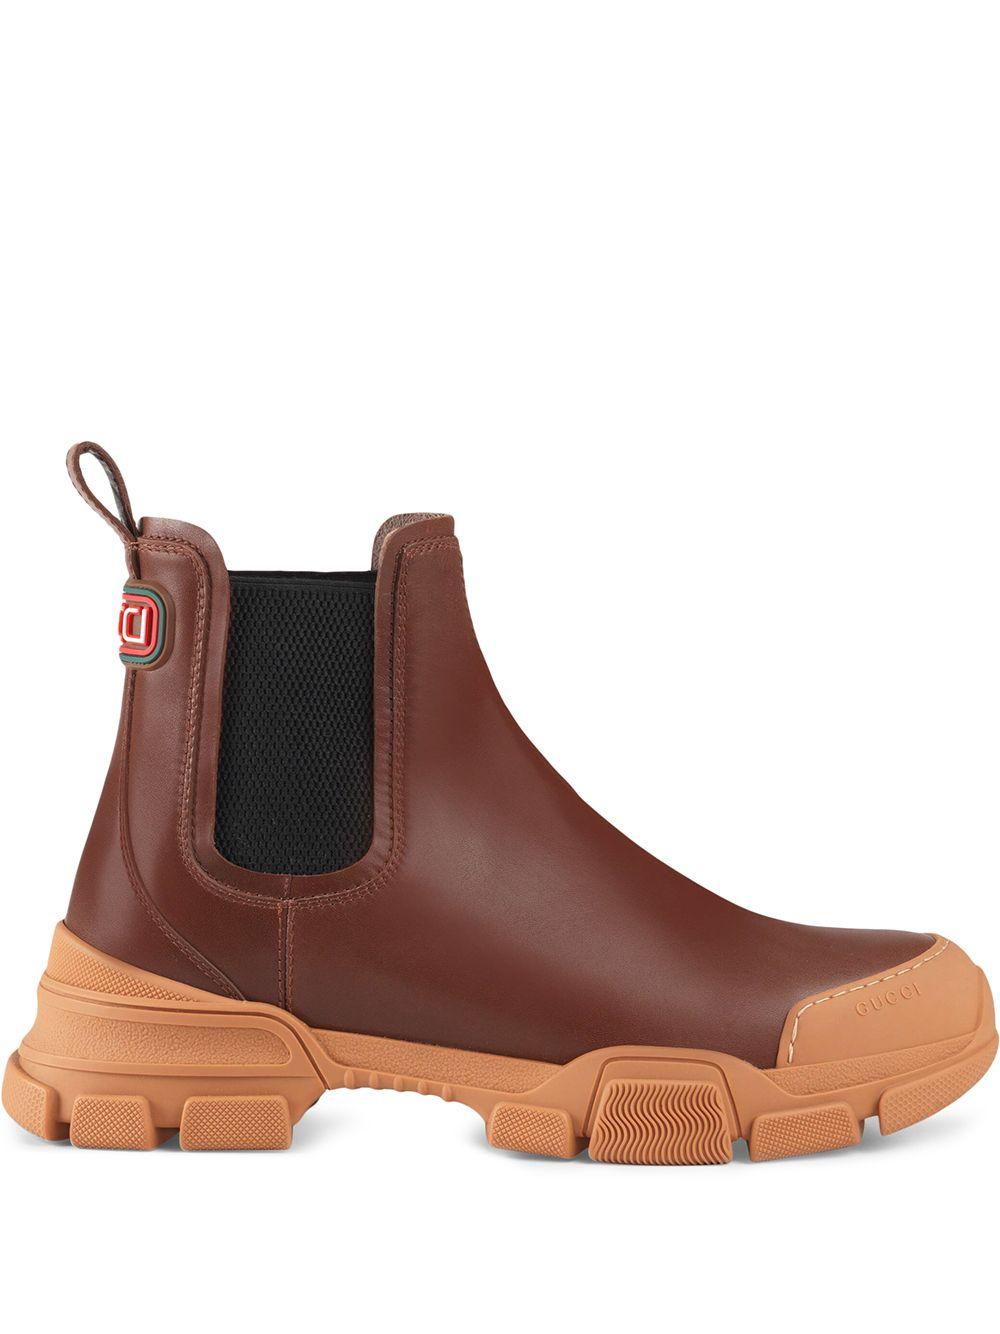 Gucci Leather Chunky Sole Chelsea Boots in Brown for Men - Lyst